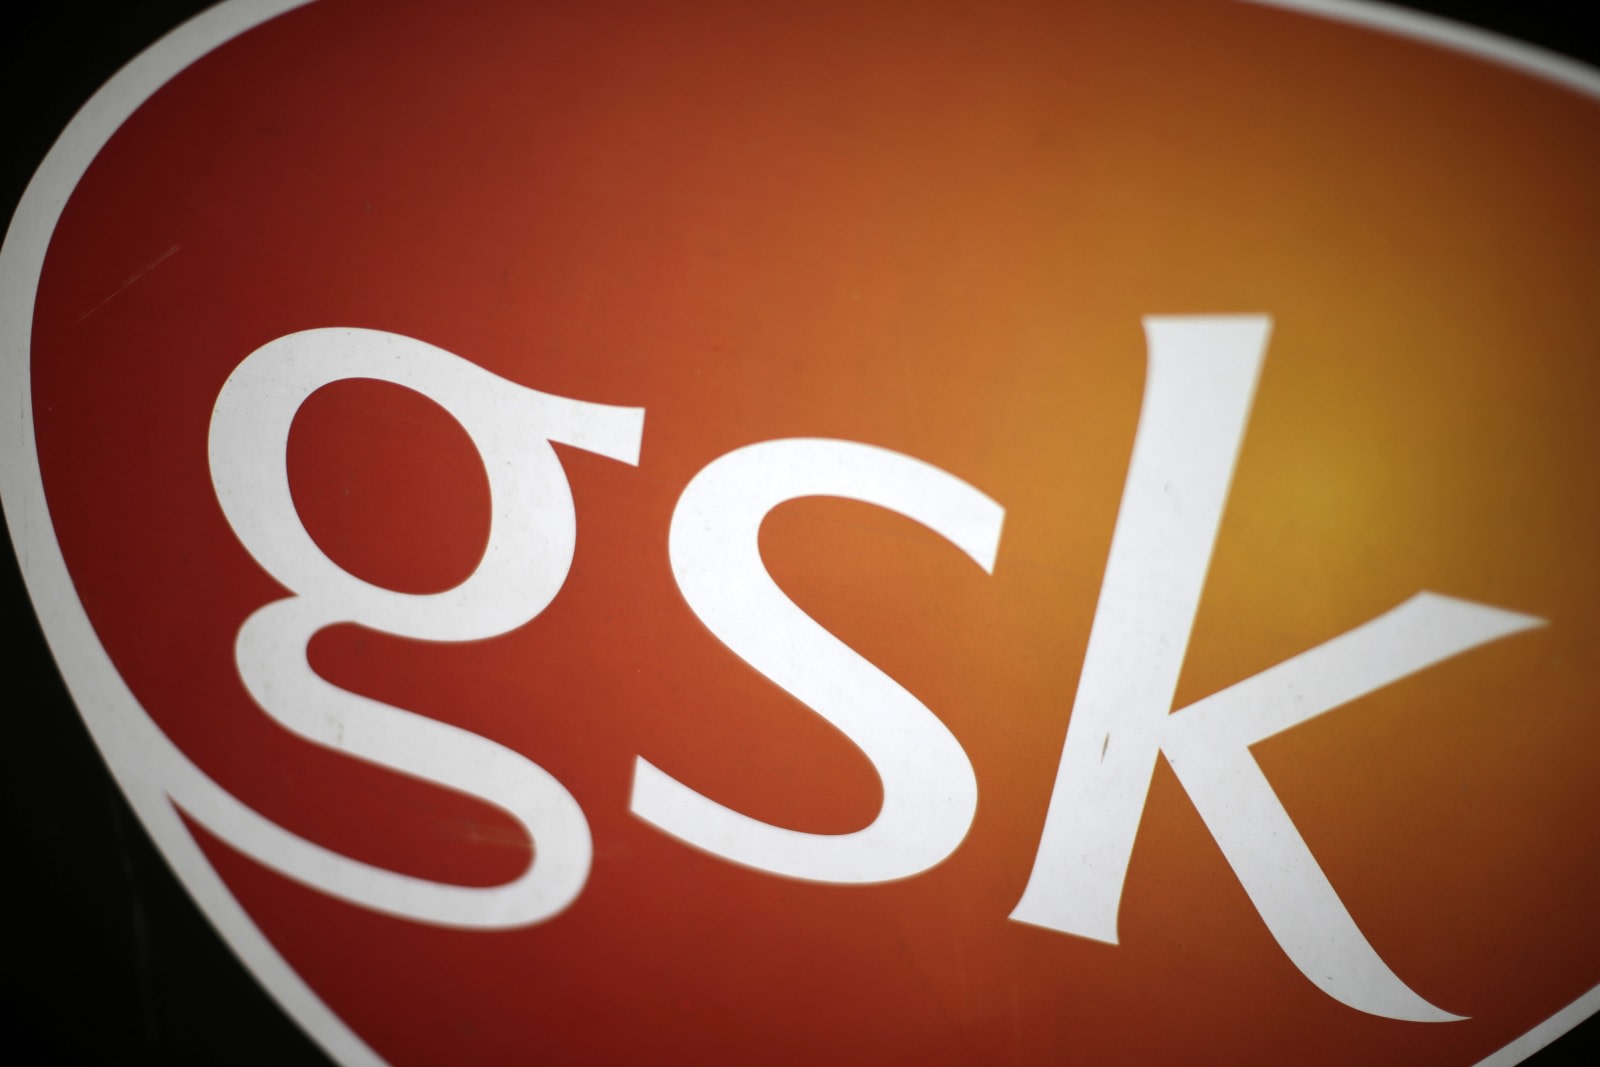 Google teams up with GSK to develop 'bioelectronic medicines'